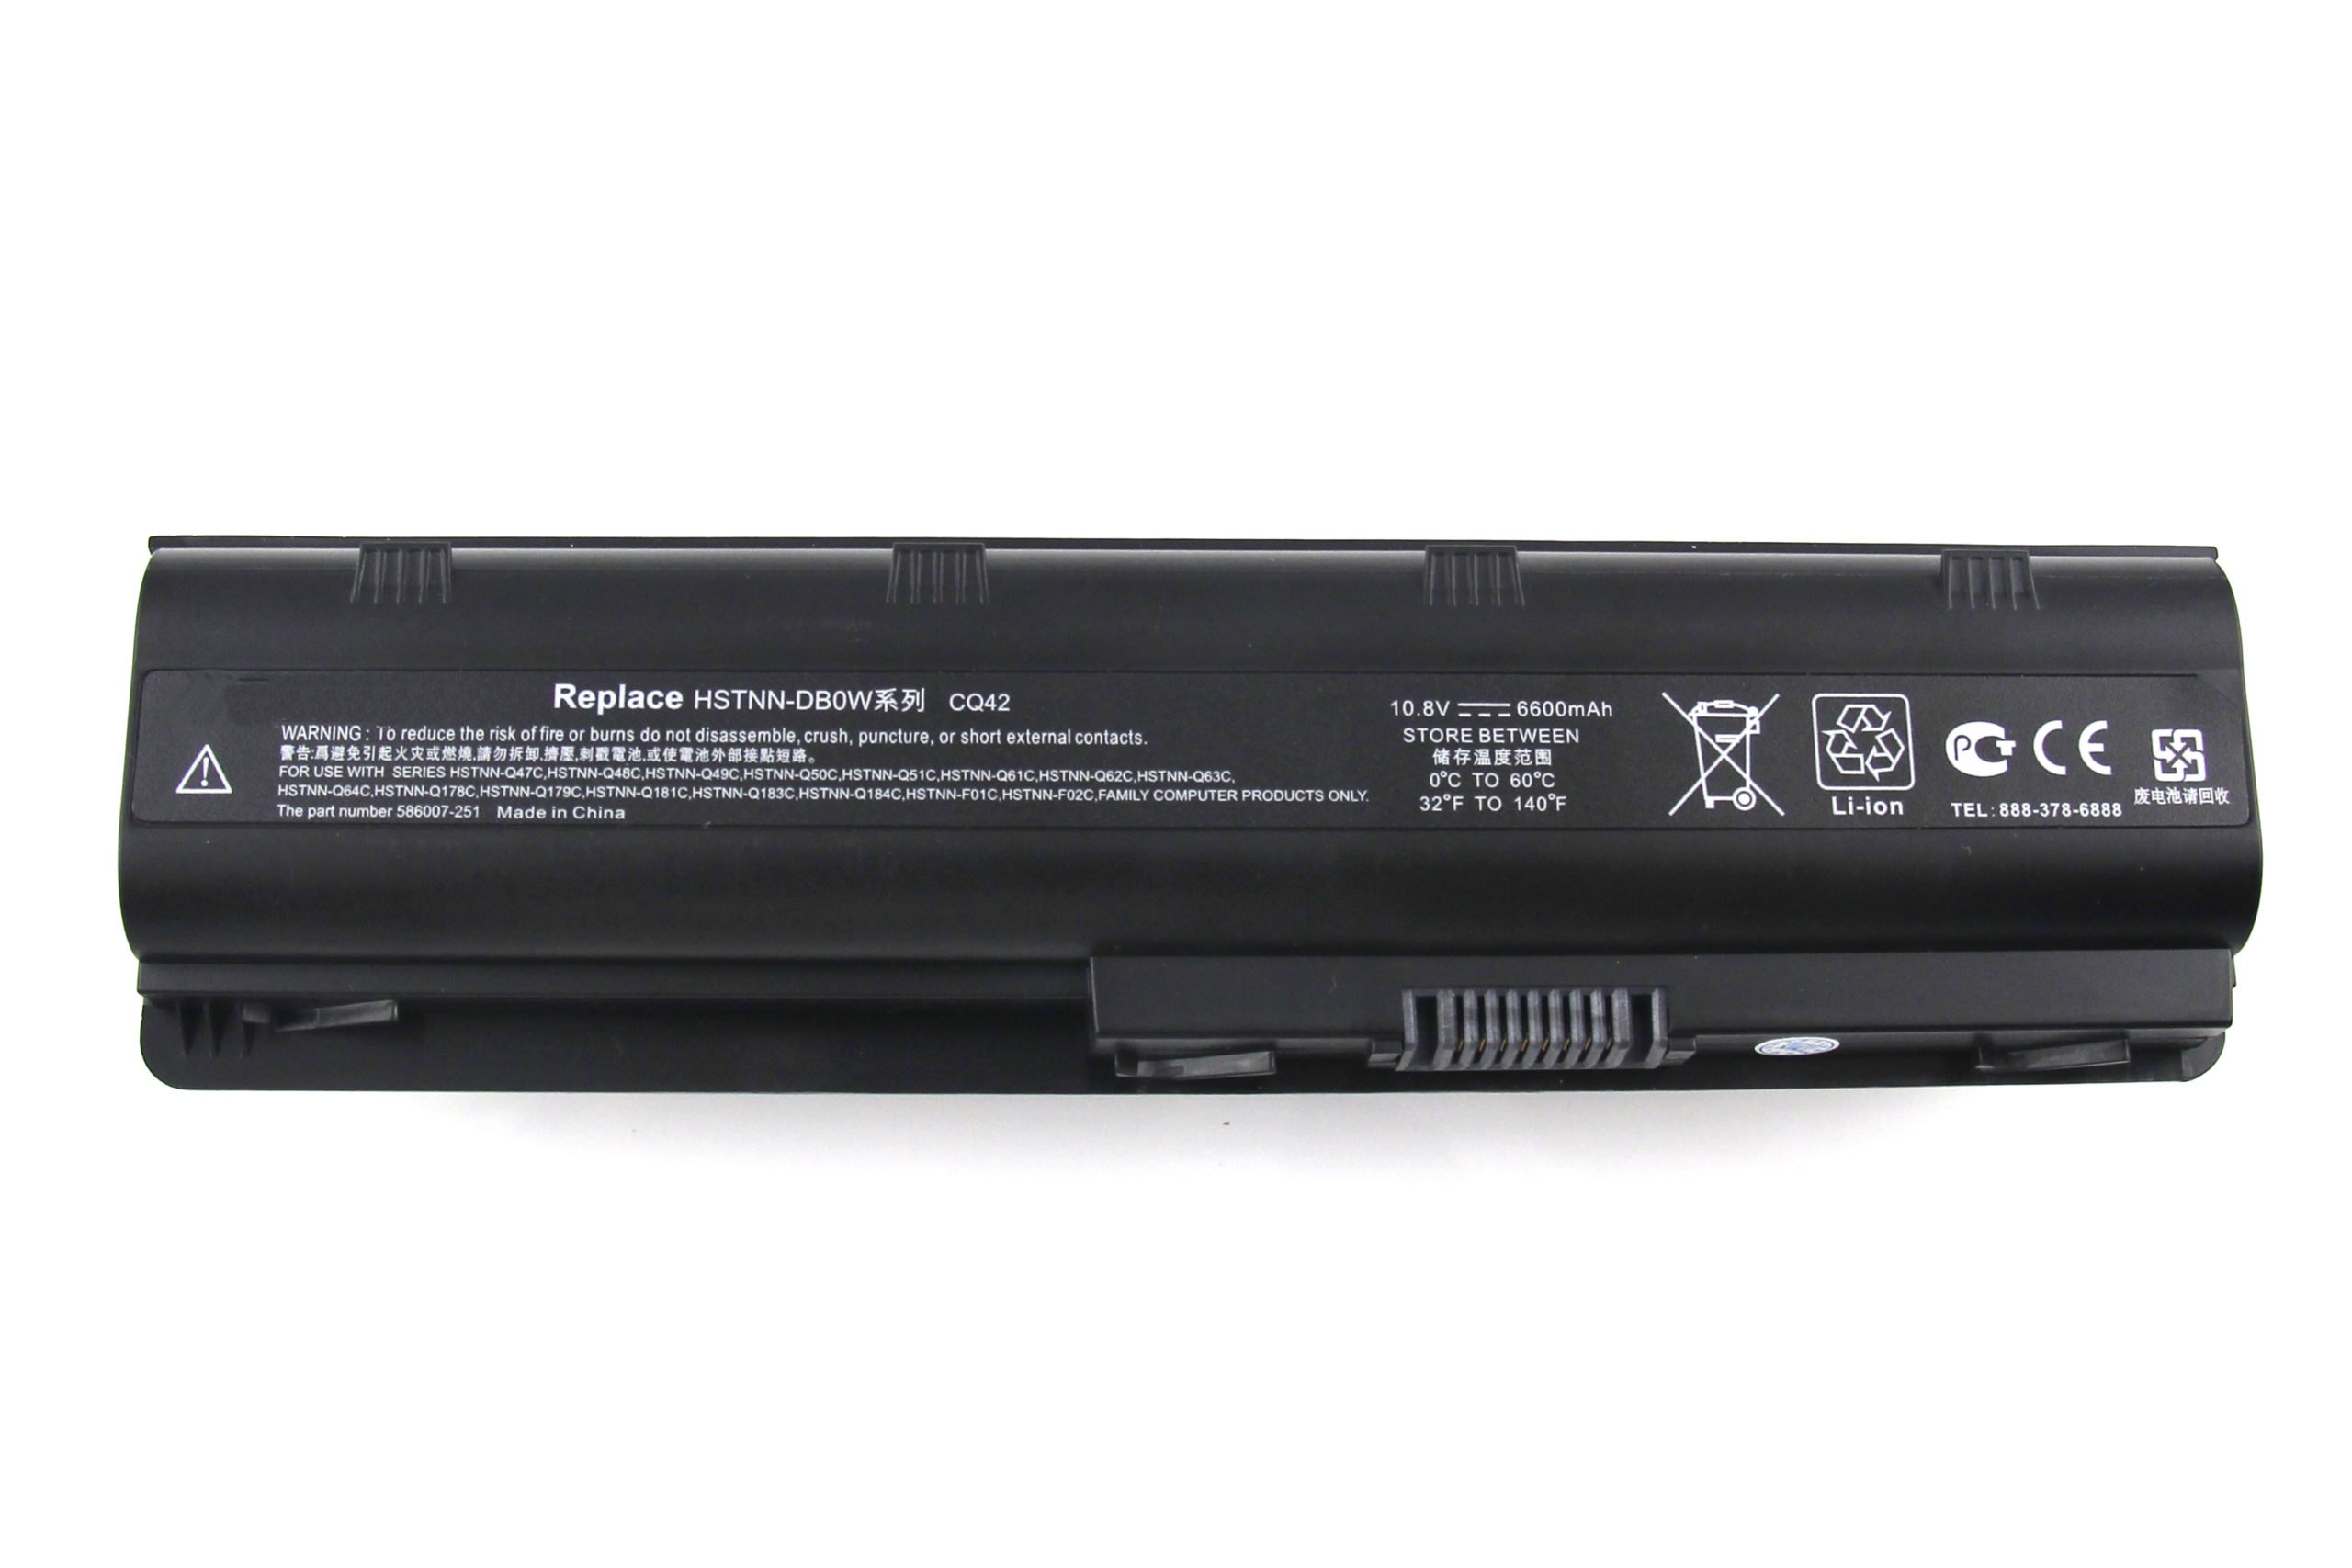 The Best Hp Laptop Batteries: What To Look For